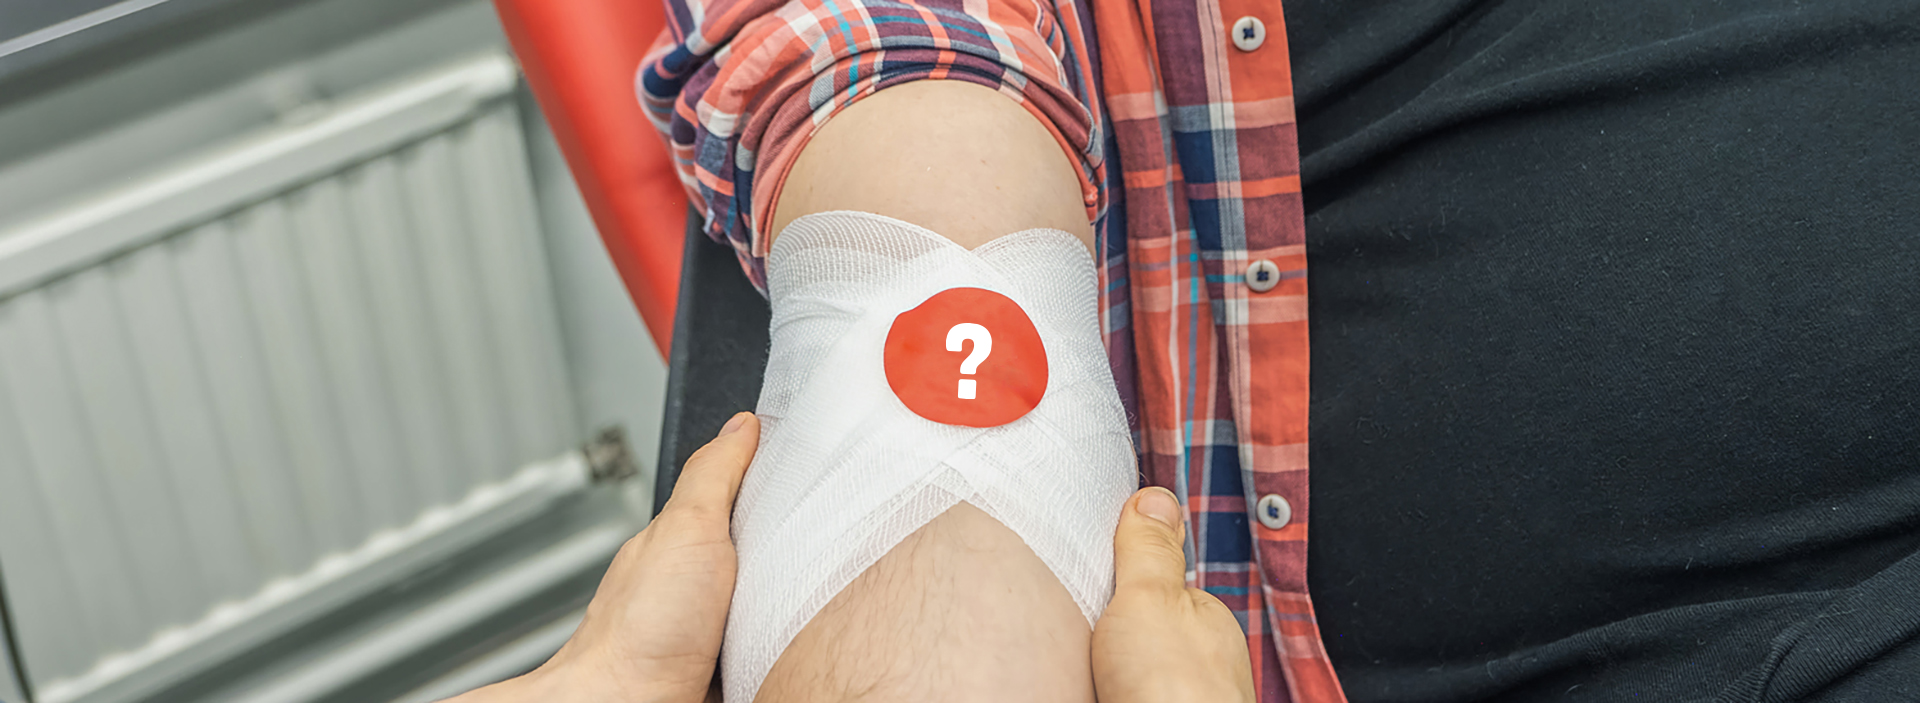 A blood donor's hand with a question mark on a bandage sticker.